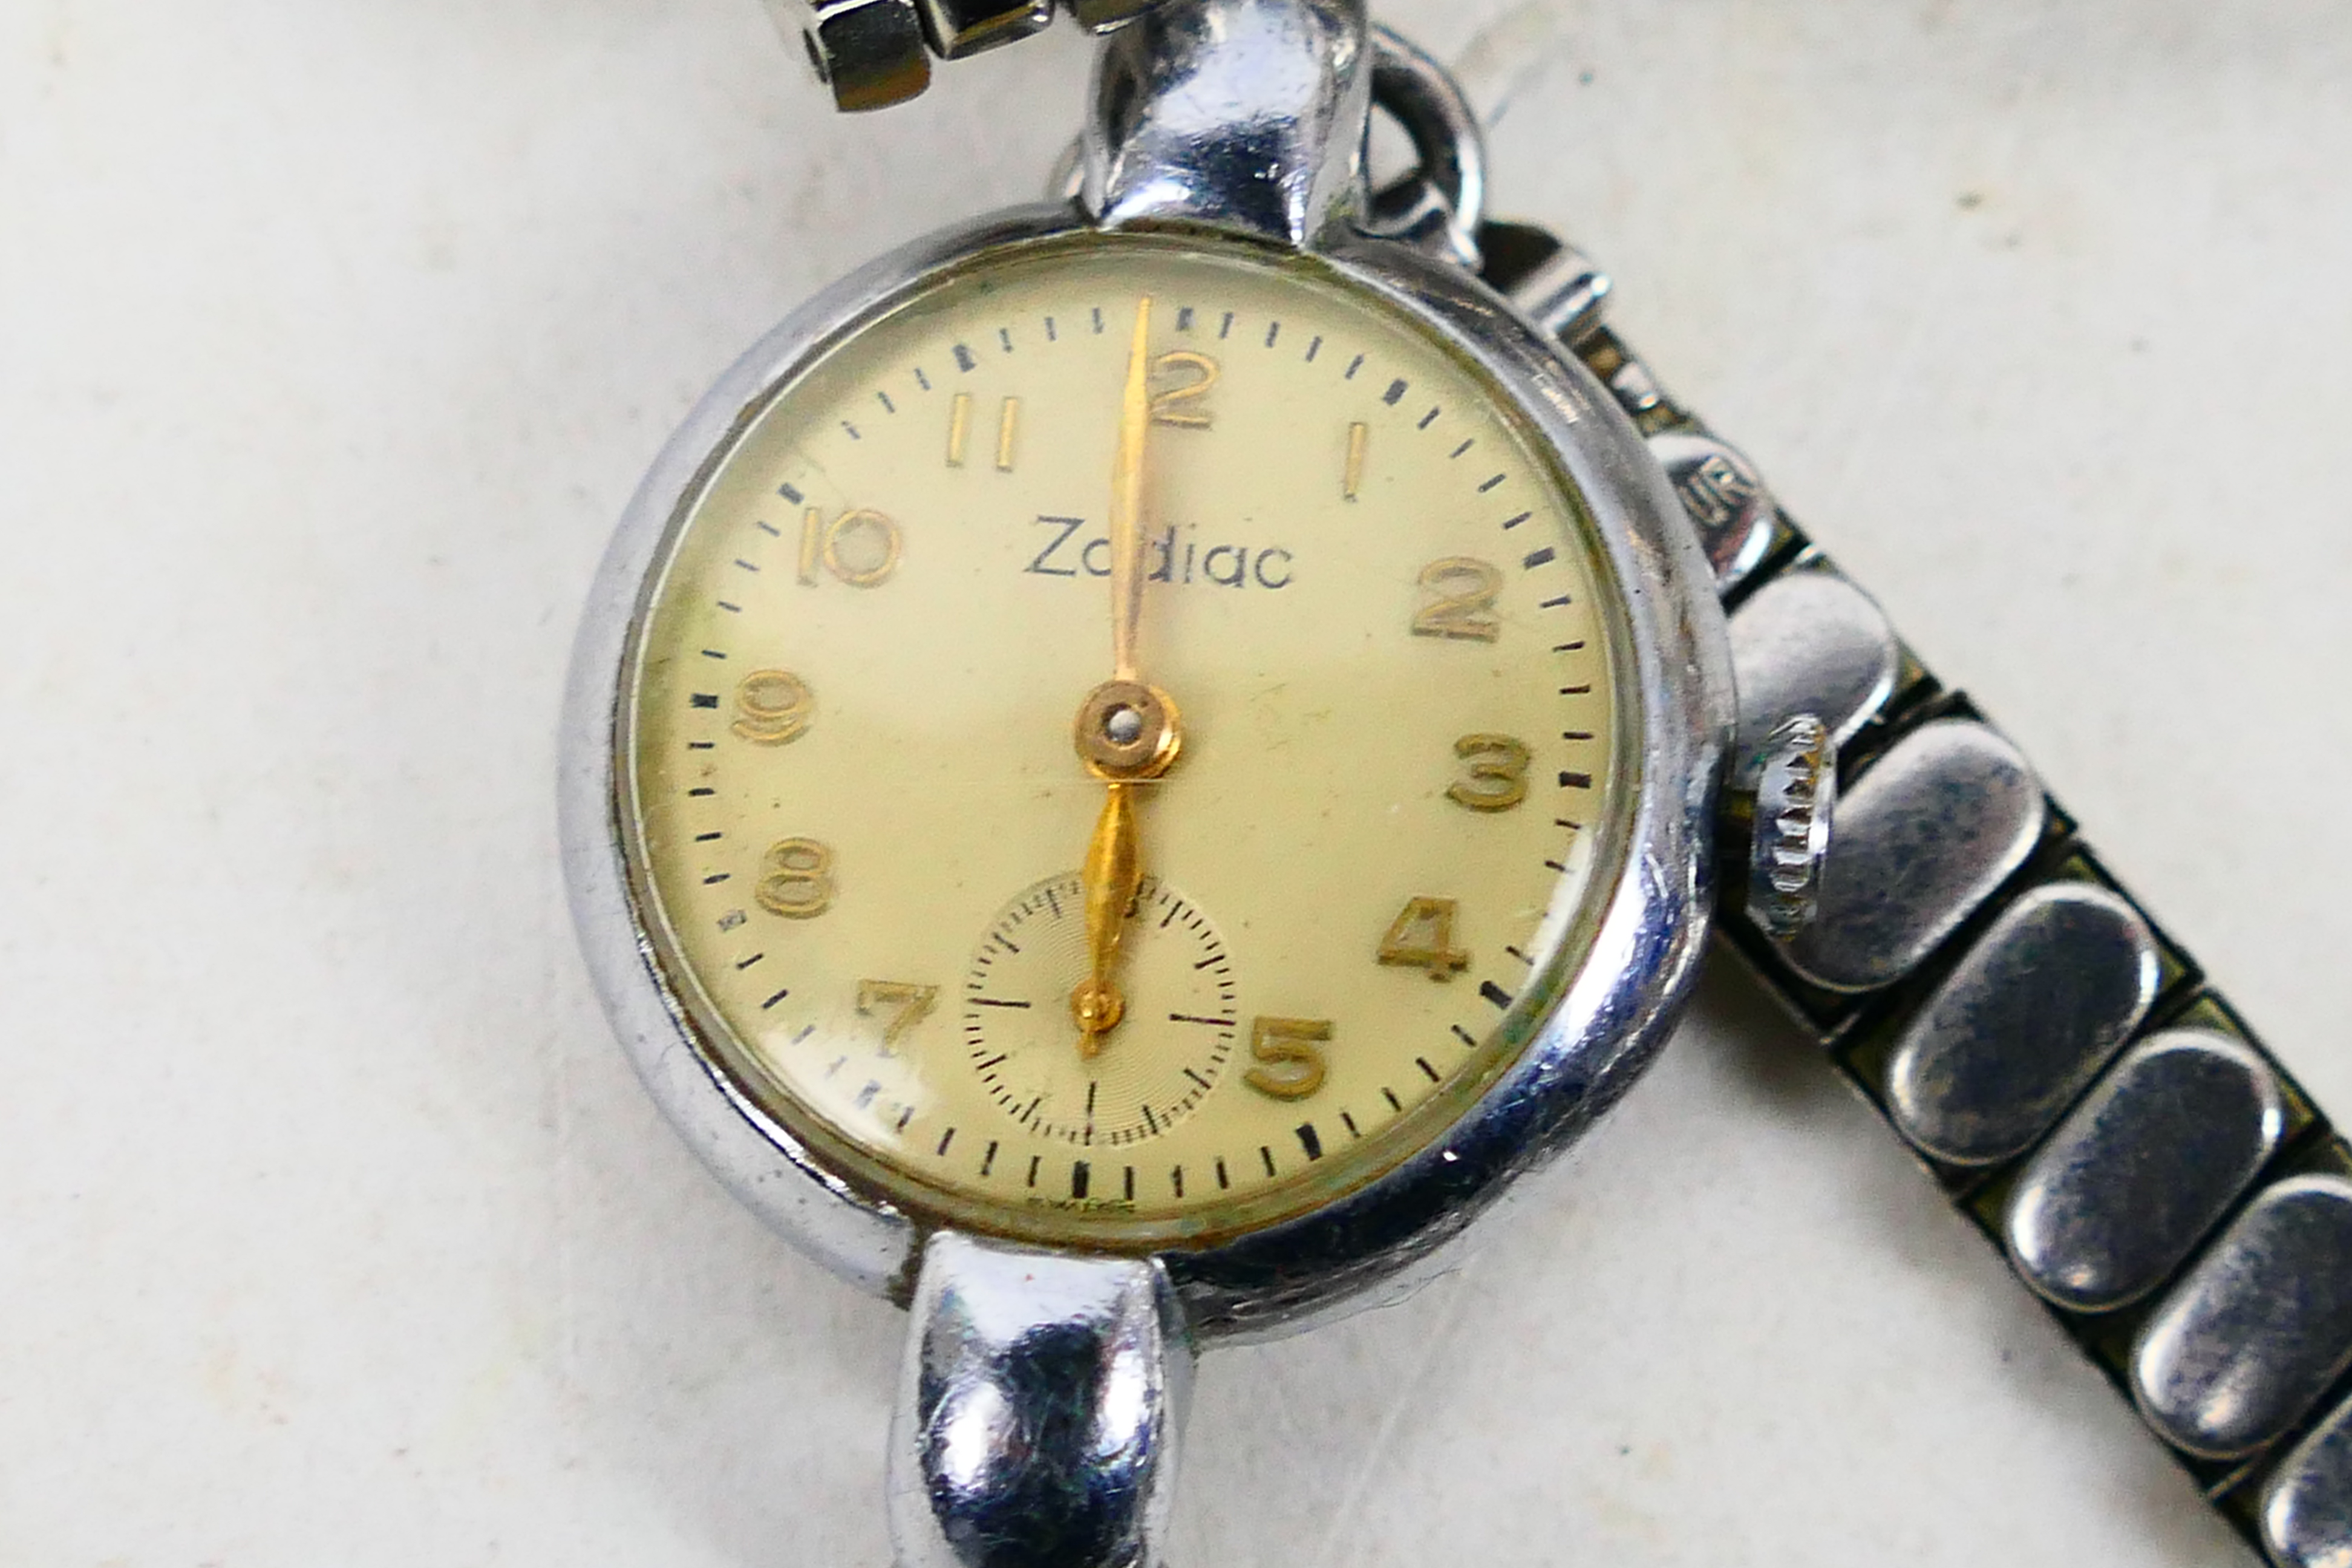 A collection of wrist watches to include Sekonda, Ingersoll, Reflex, Pulsar and similar. - Image 5 of 8